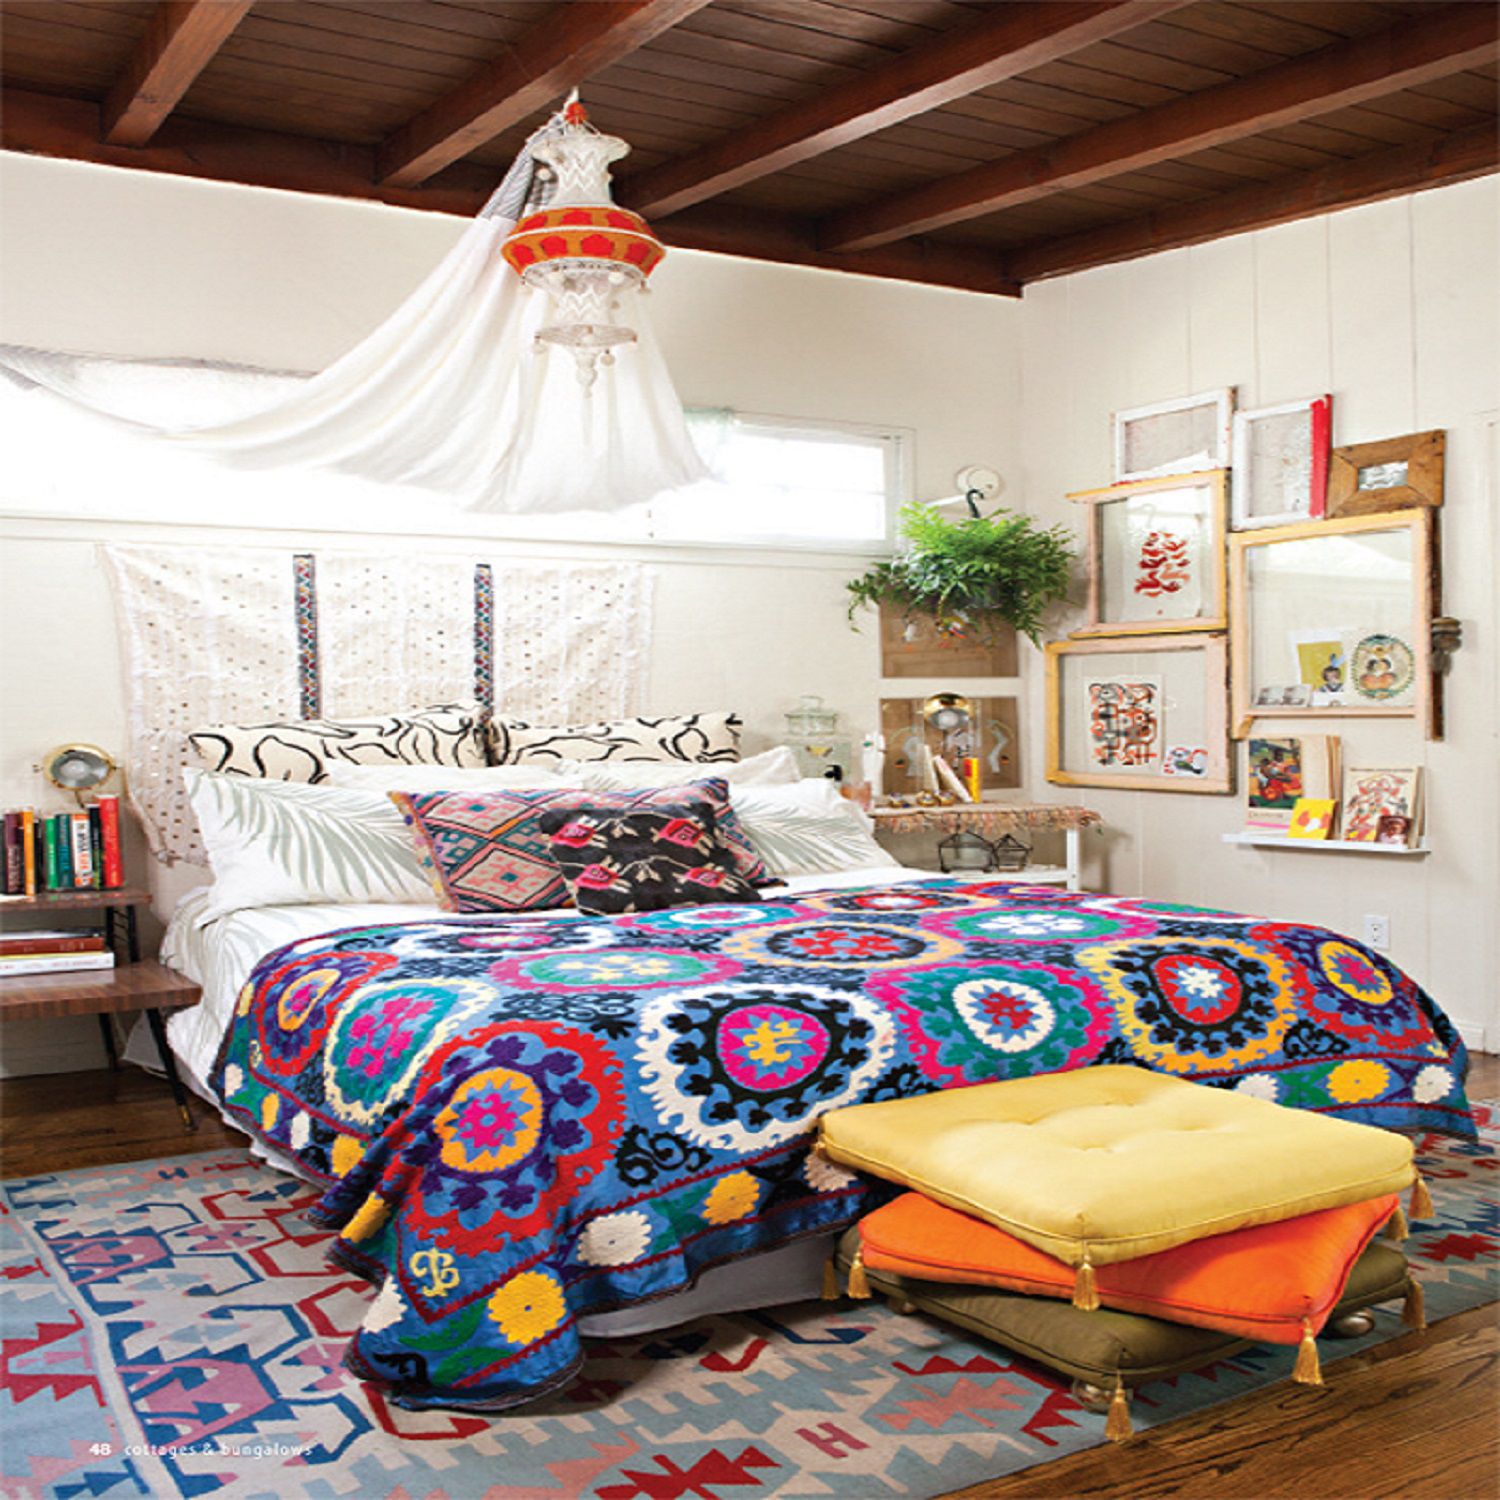 Simple Bohemian Chic Decorating Ideas for Large Space